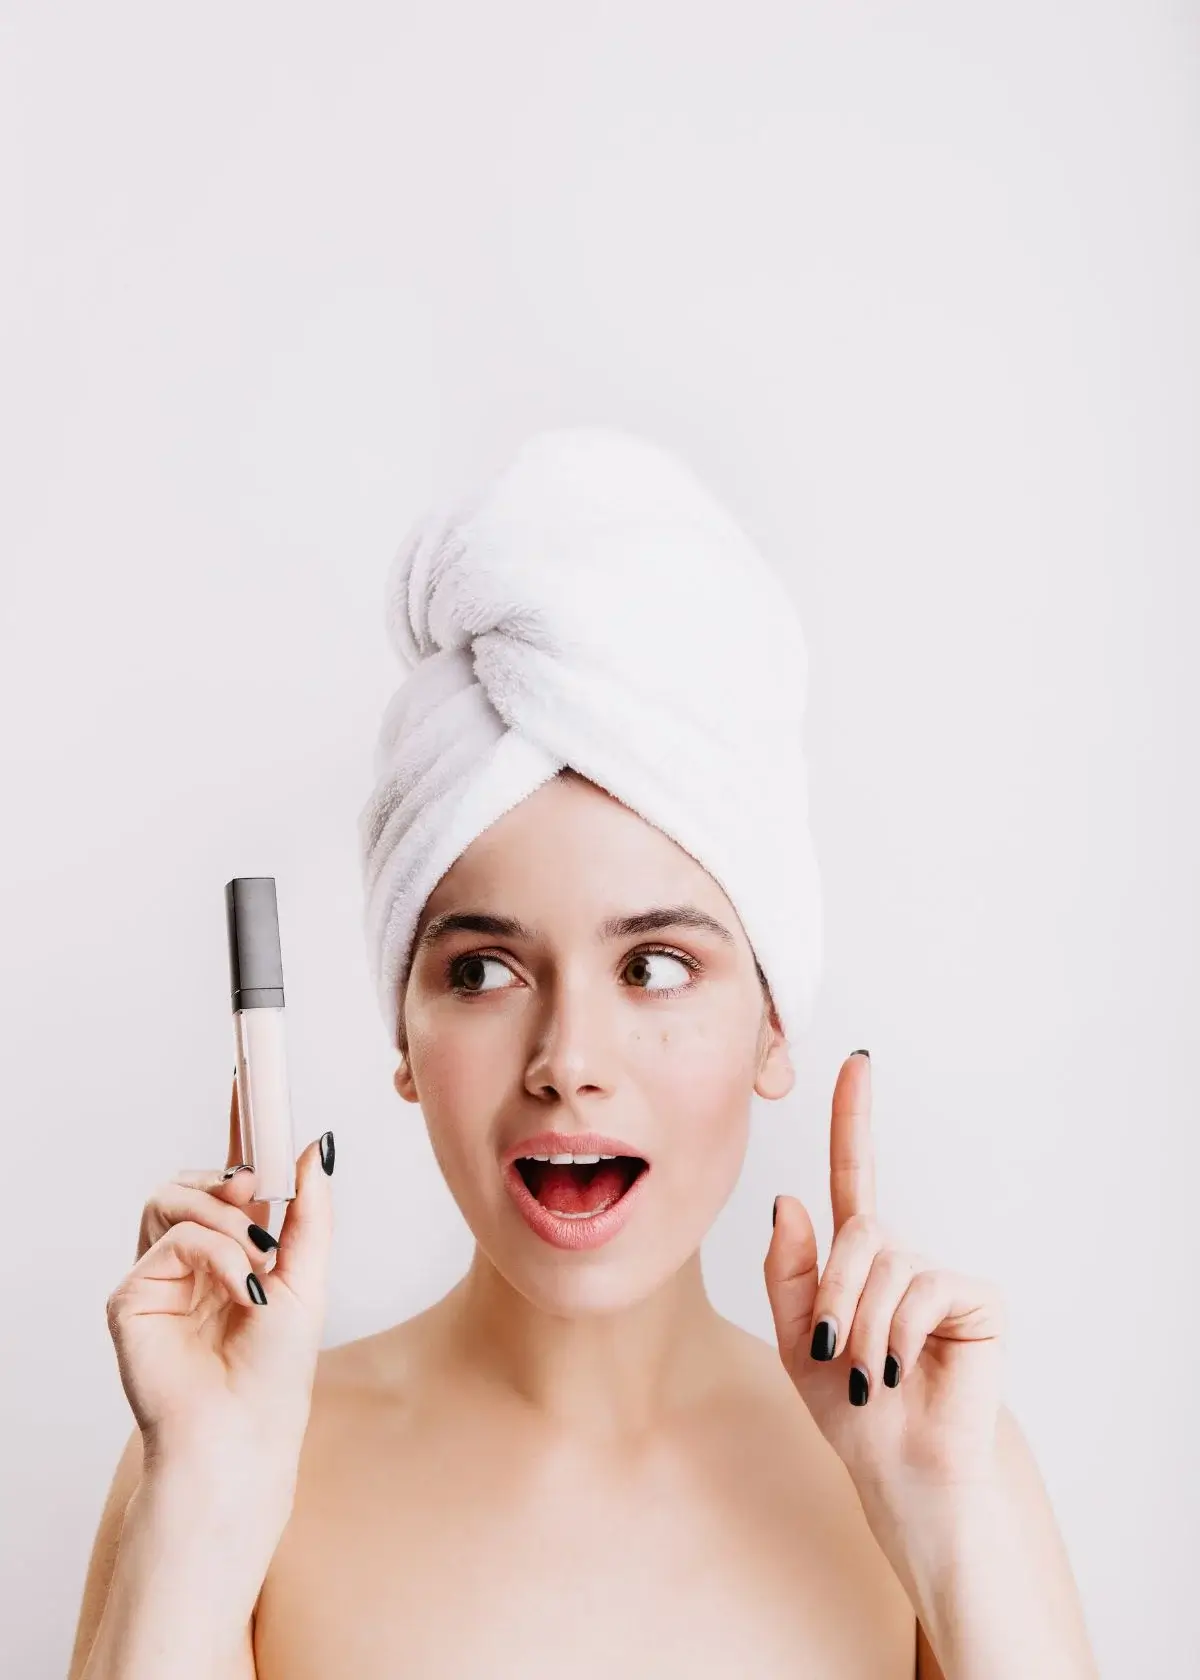 How to choose the right cruelty free concealer?